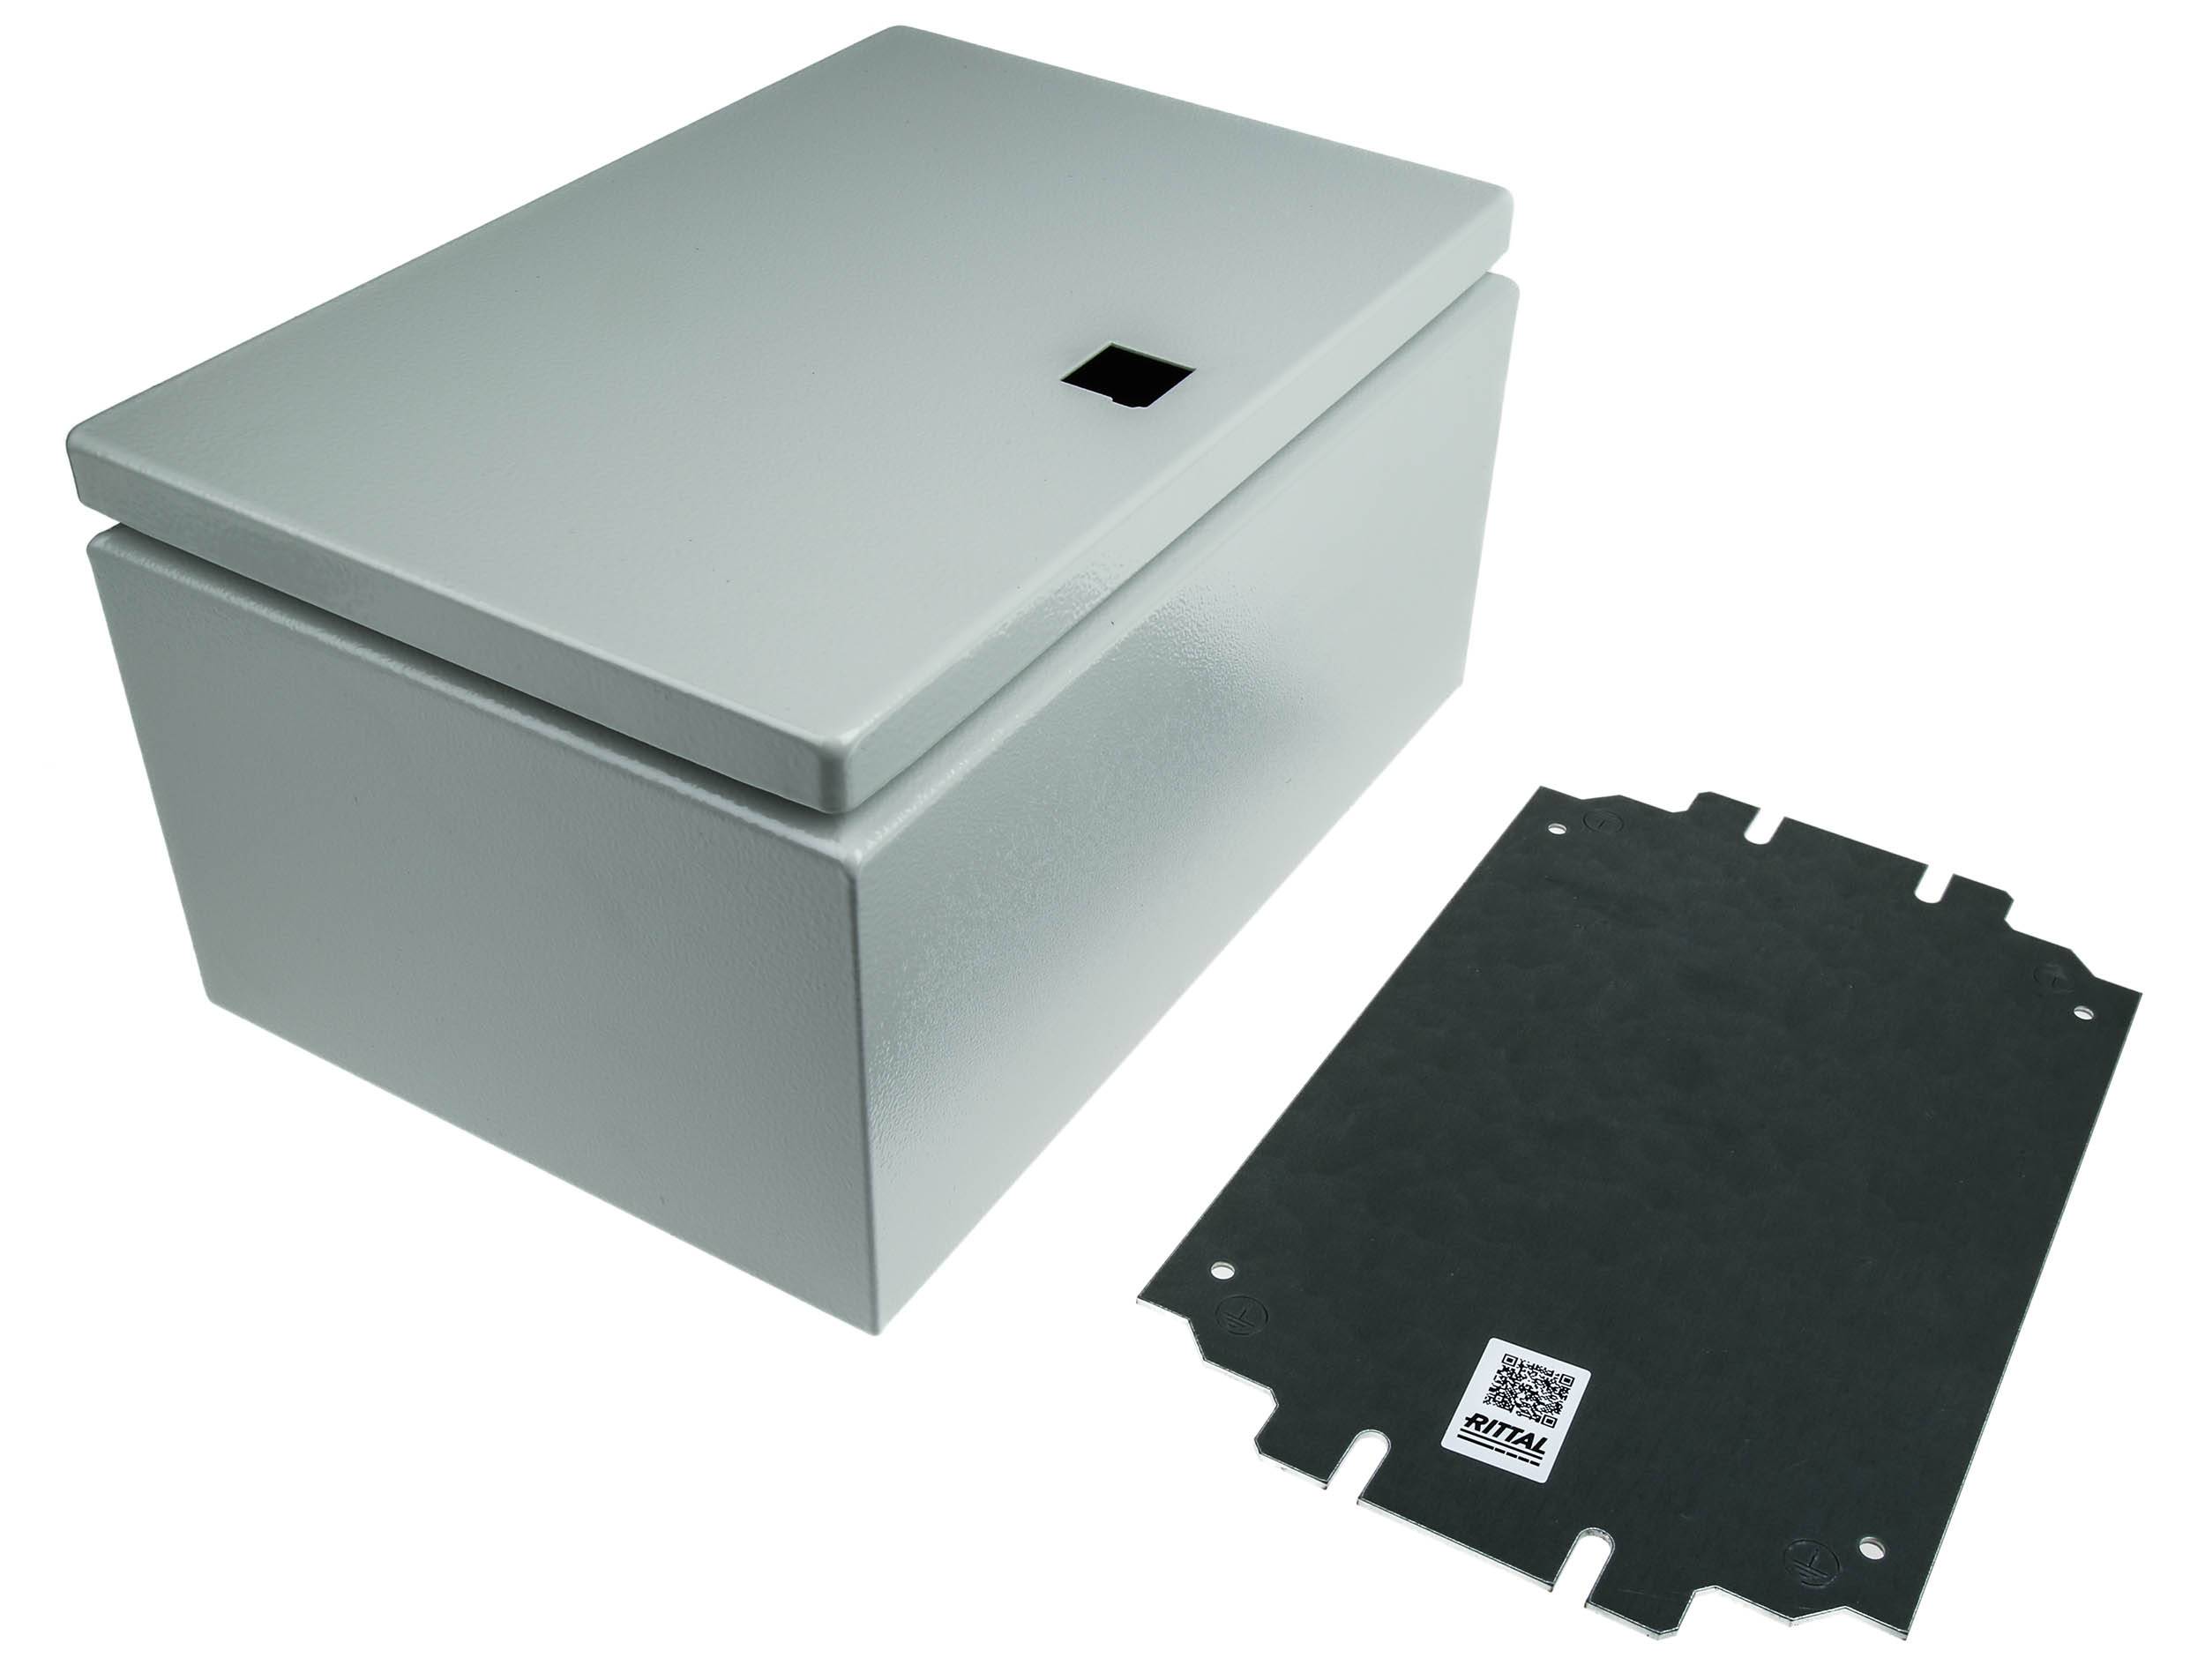 Rittal KX 1574.000 Fitting bracket, Wall-mount enclosure 200 x 300 x 155  Steel plate Grey-white (RAL 7035) pc(s)